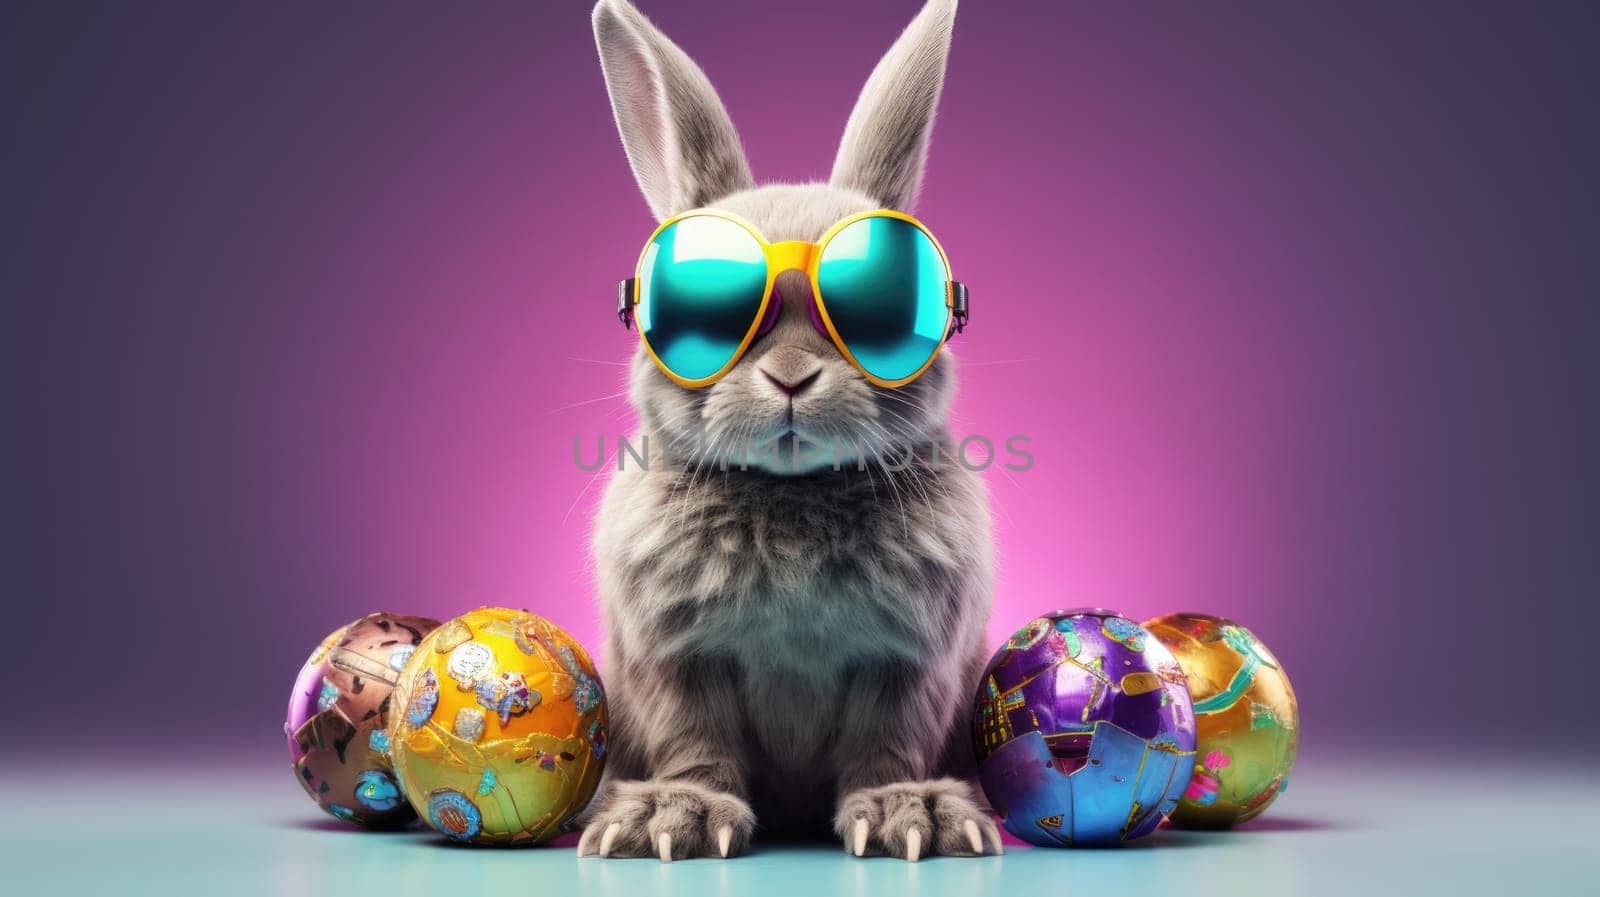 Cyberpunk Rabbit and Retro Outfit on bright Background with Easter eggs by JuliaDorian